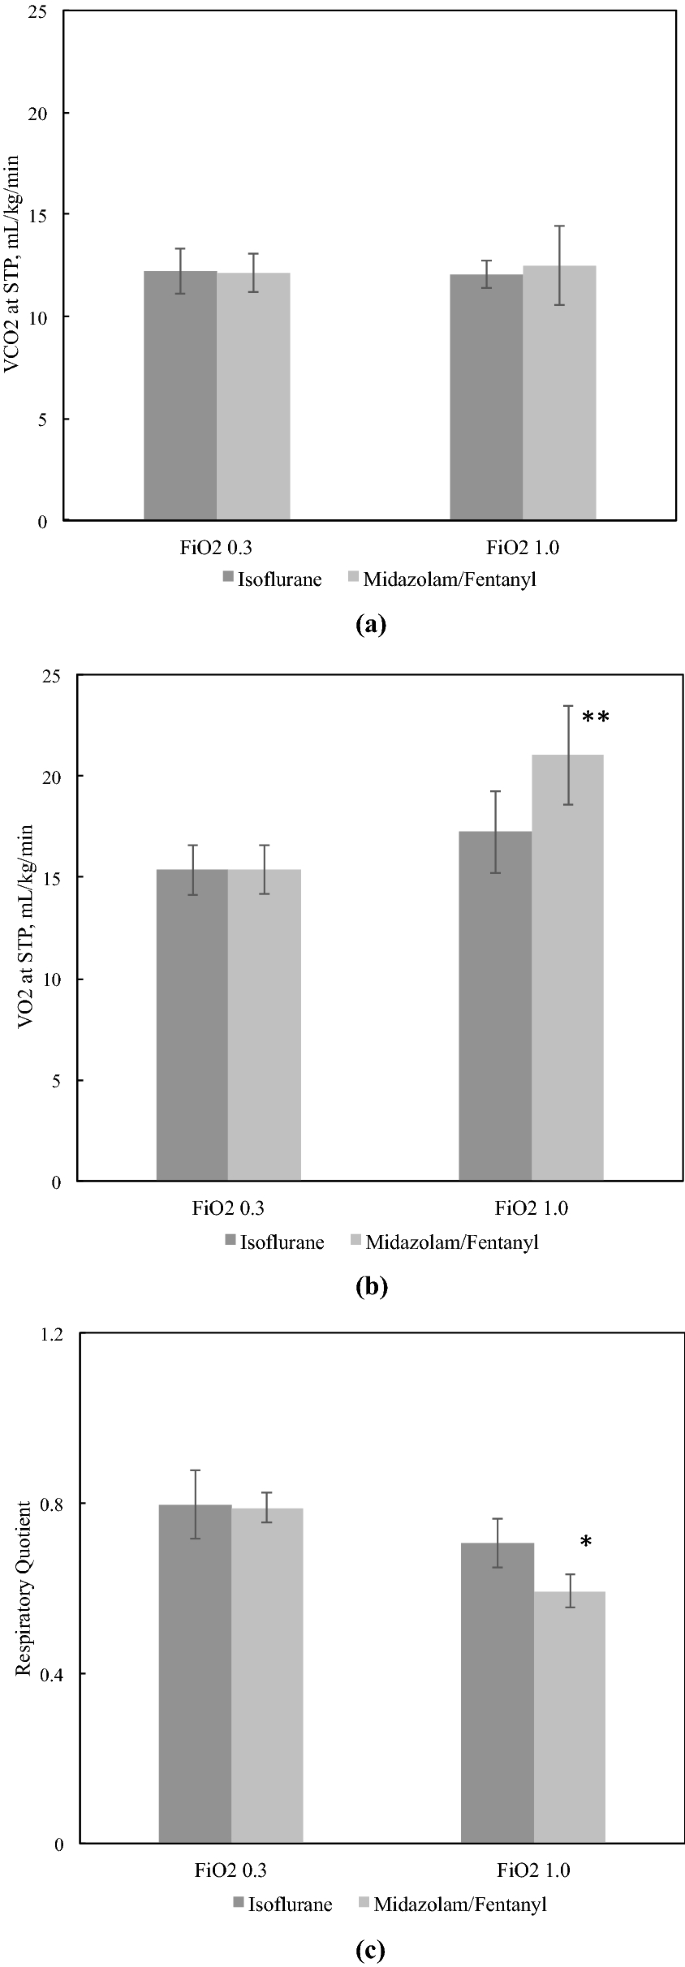 FIO2 In An Adult Model Simulating High-Flow Nasal Cannula Therapy  Respiratory Care